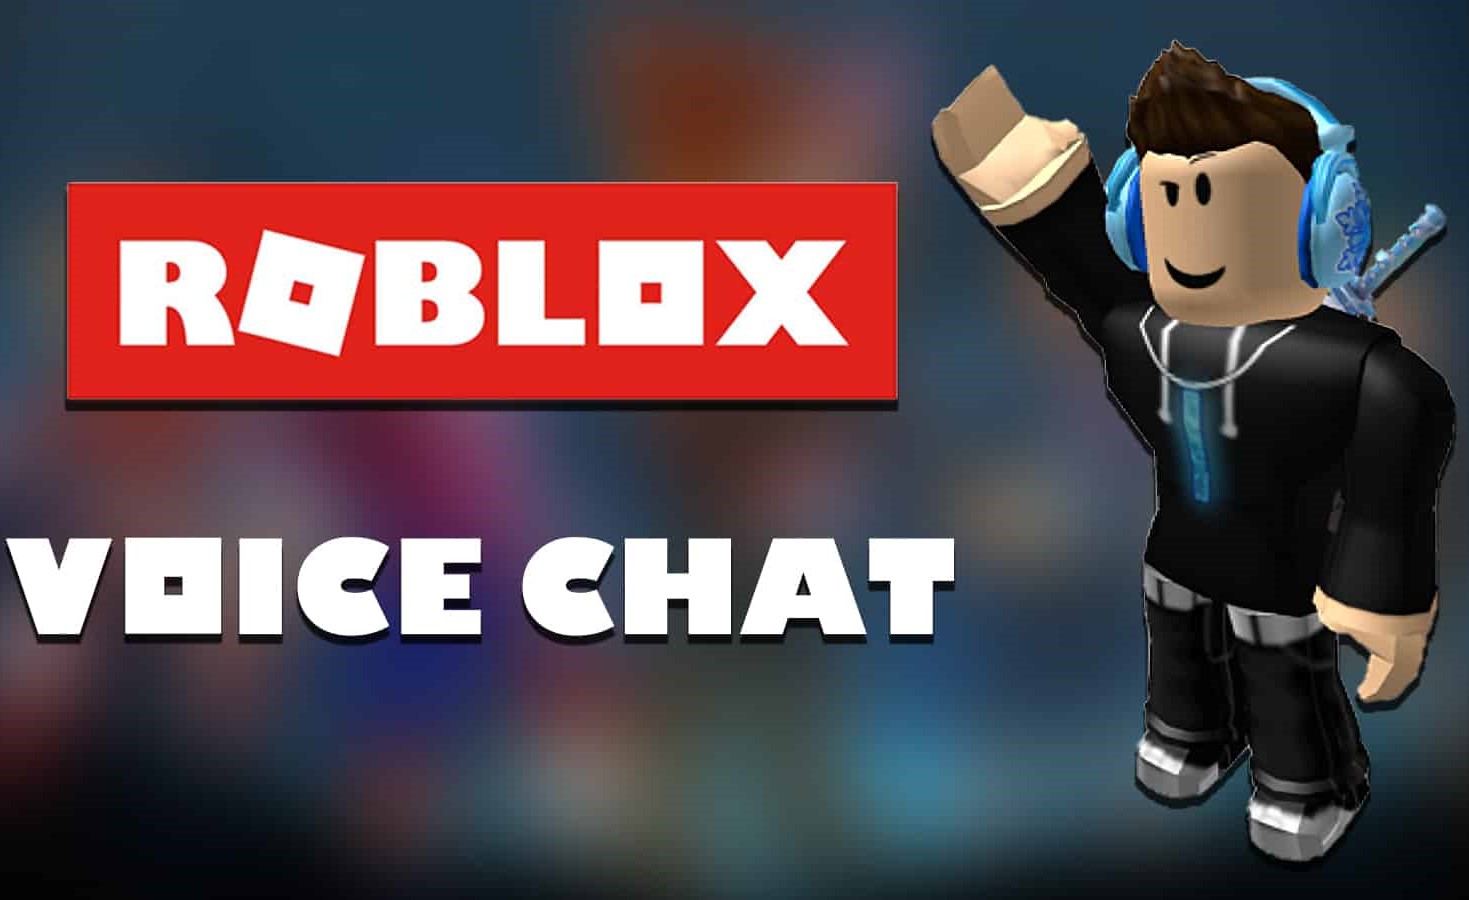 Using A Fake ID For Roblox VC?! Why Am I Missing Out On Beta Features?